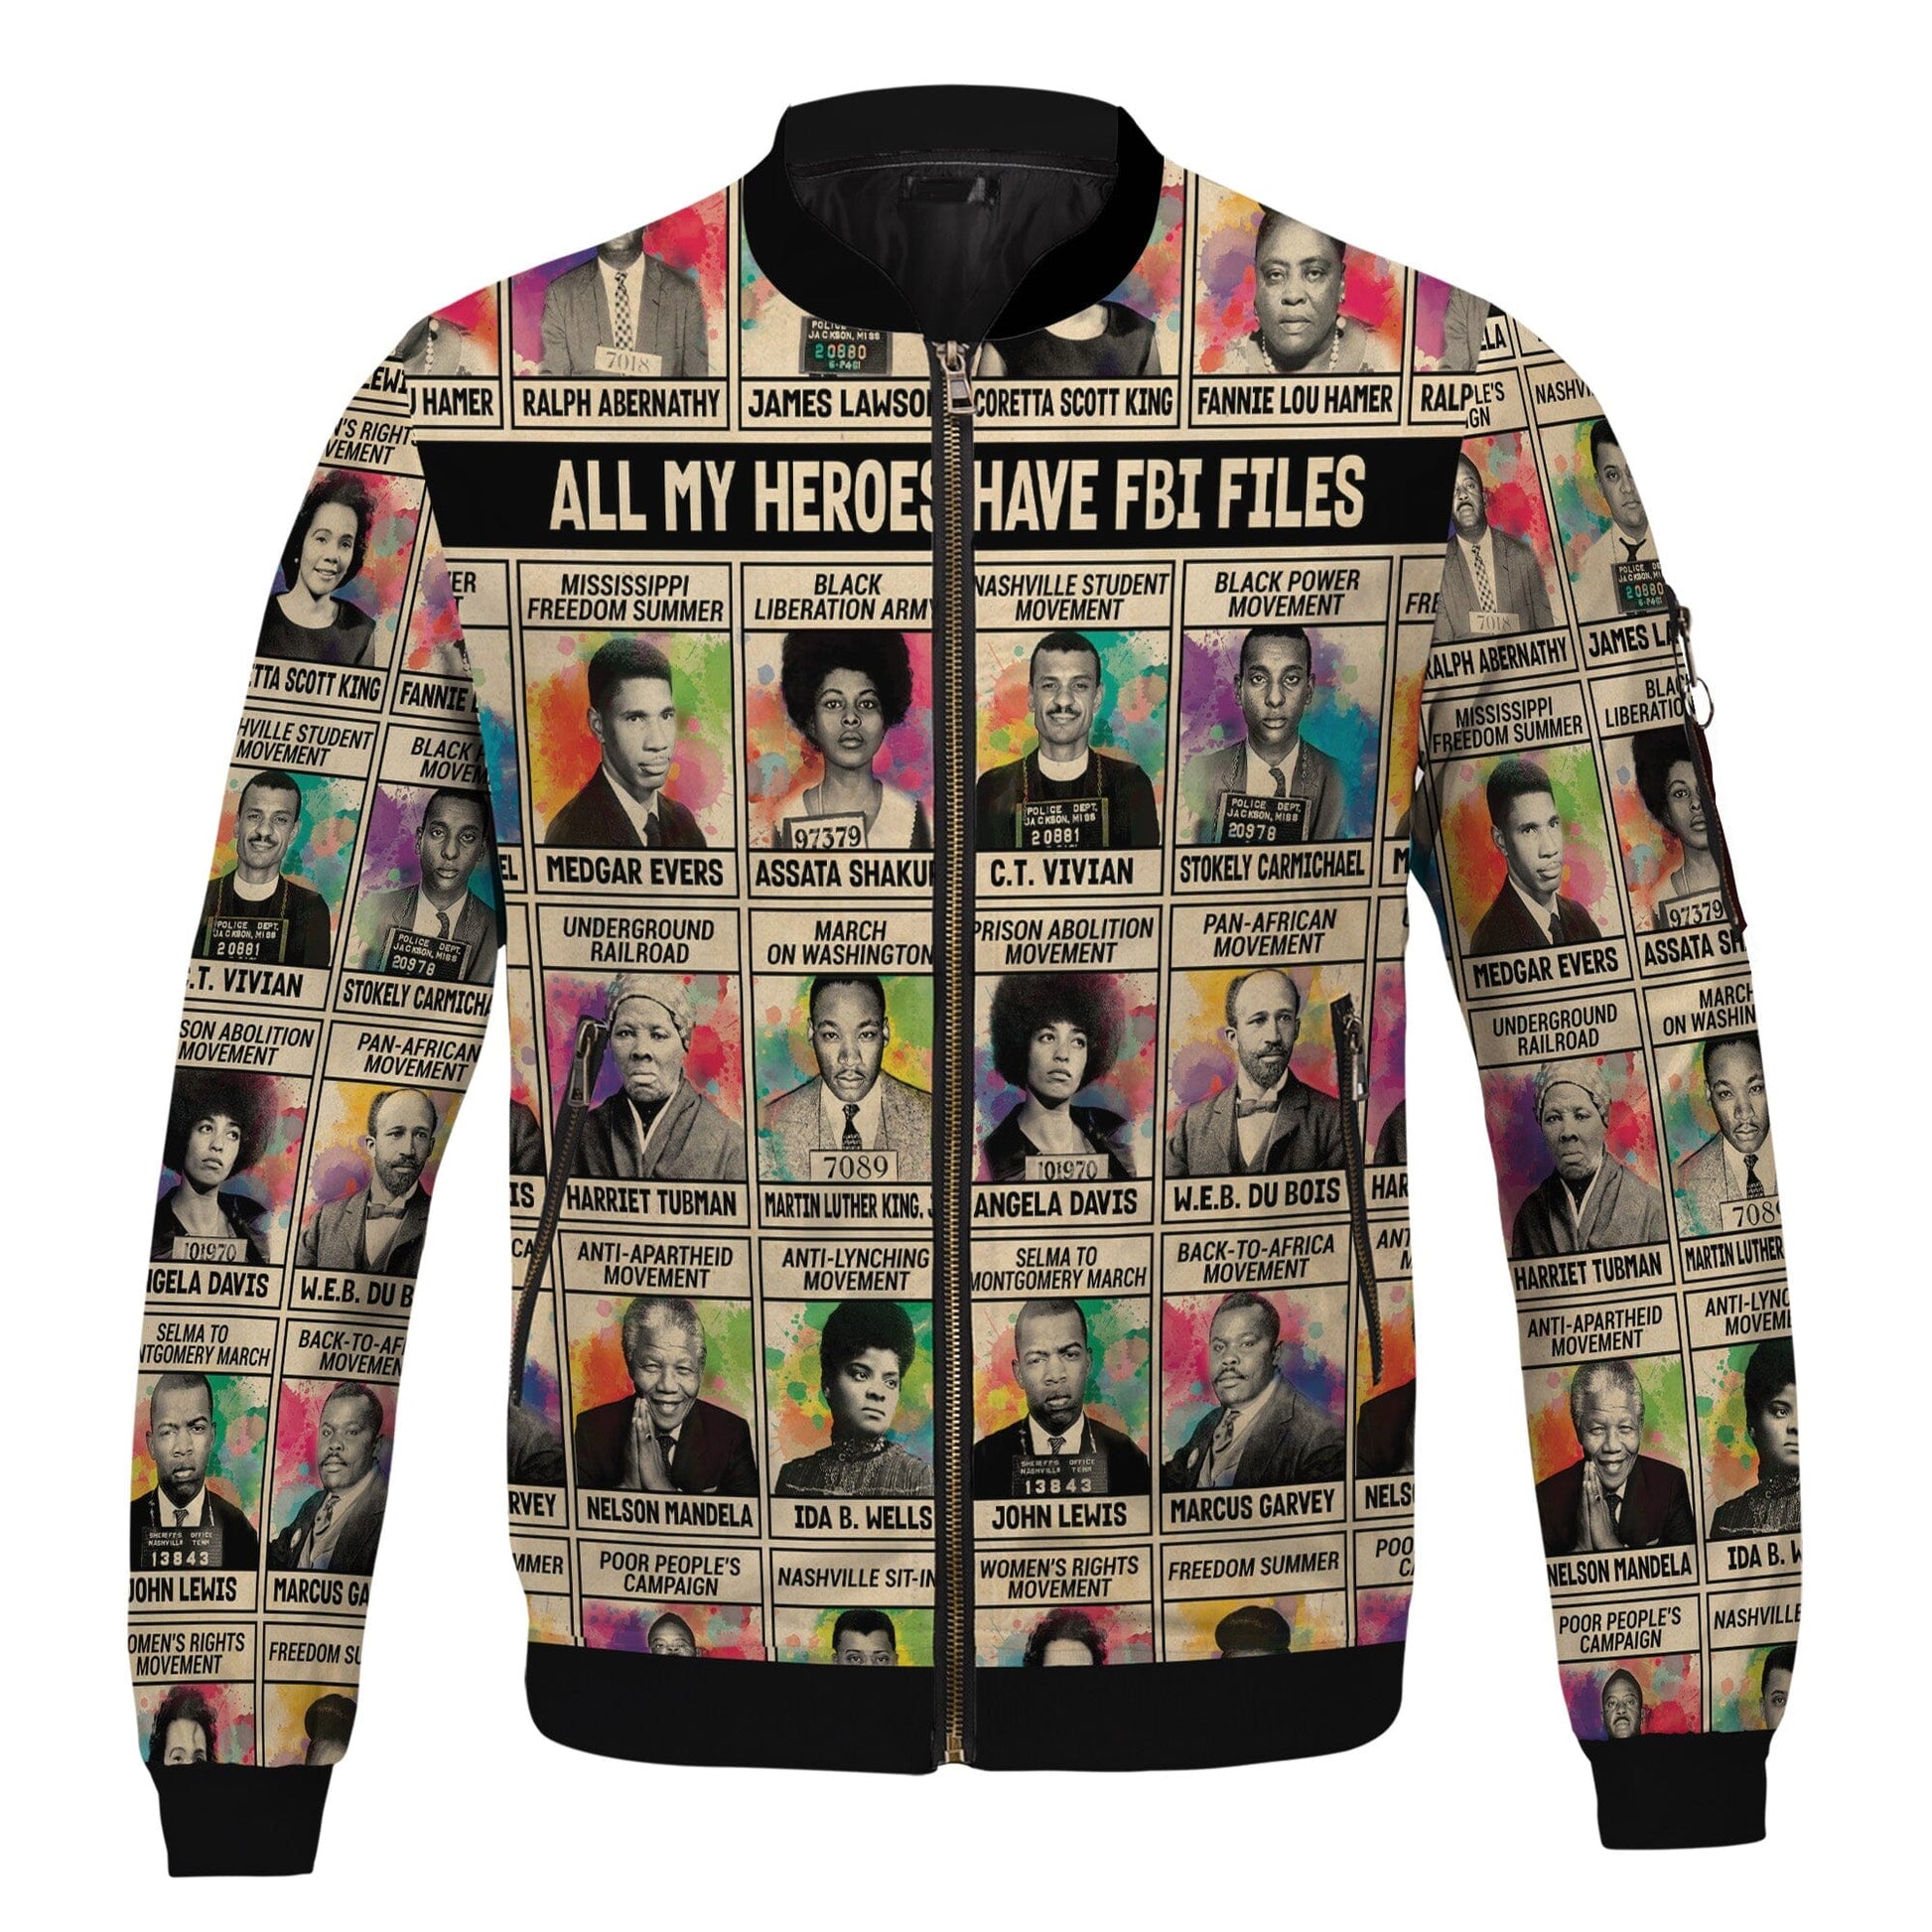 All My Heroes Have FBI Files Bomber Jacket Bomber Jacket Tianci 